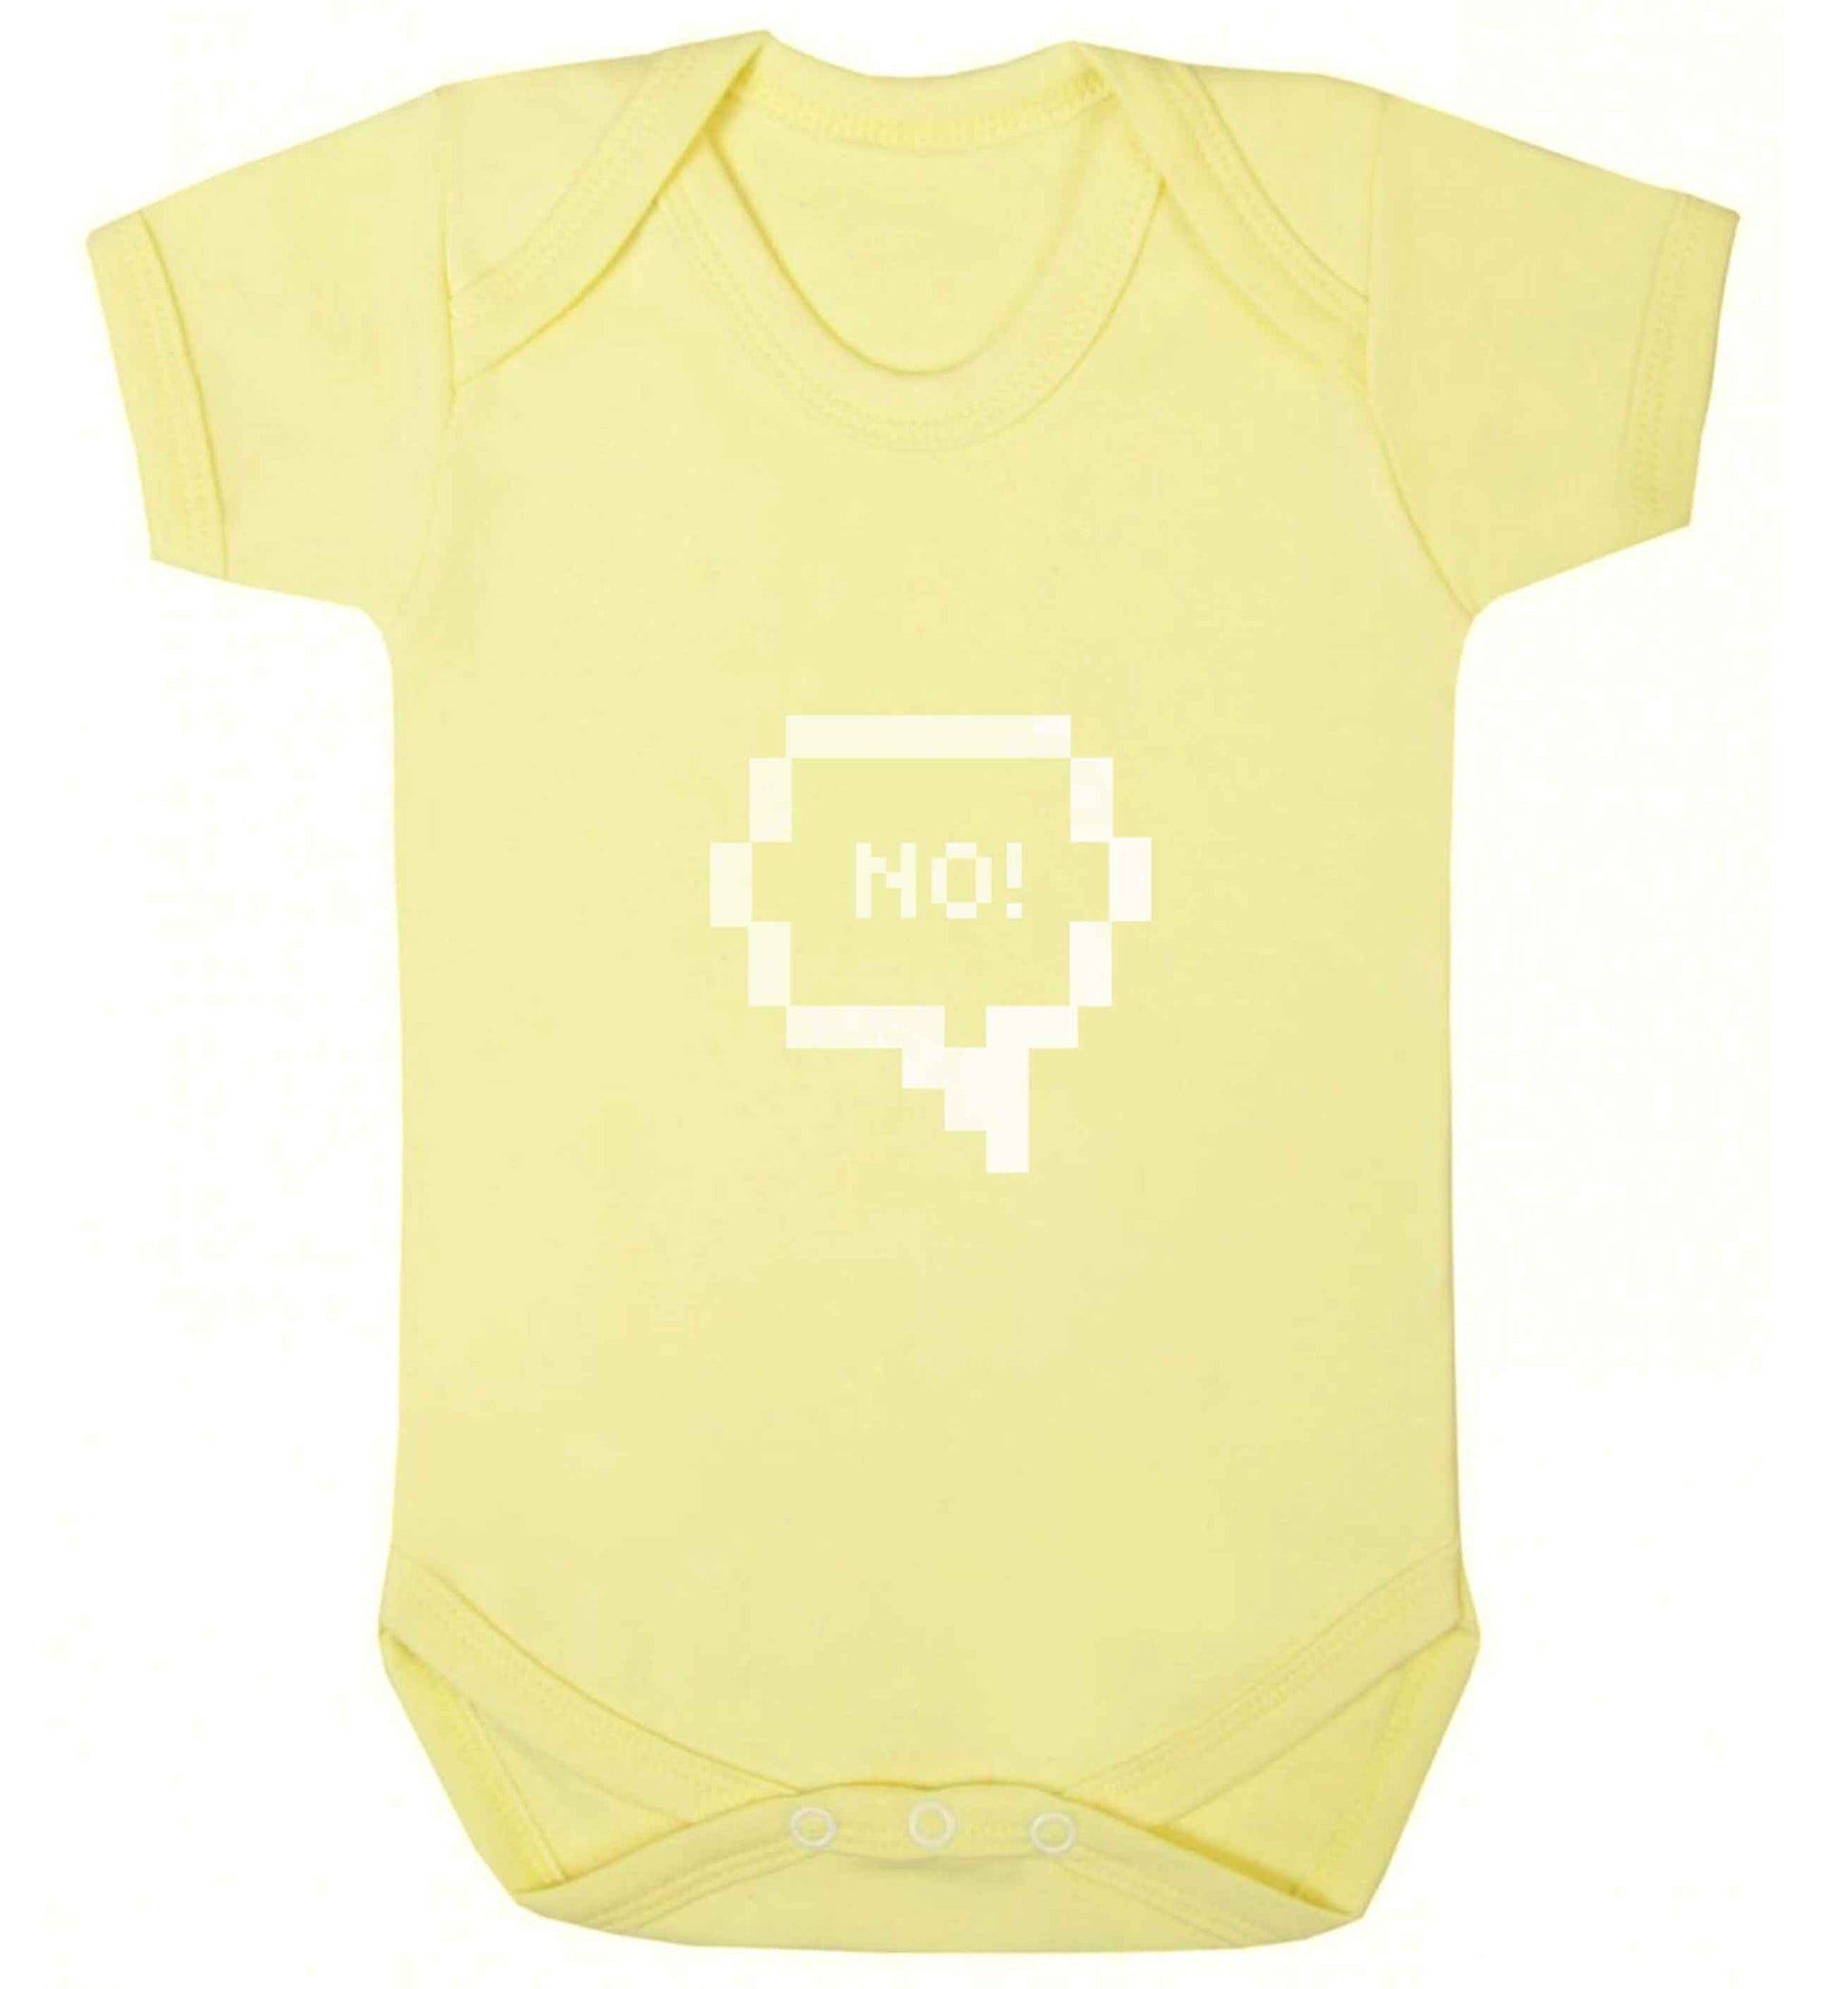 No baby vest pale yellow 18-24 months